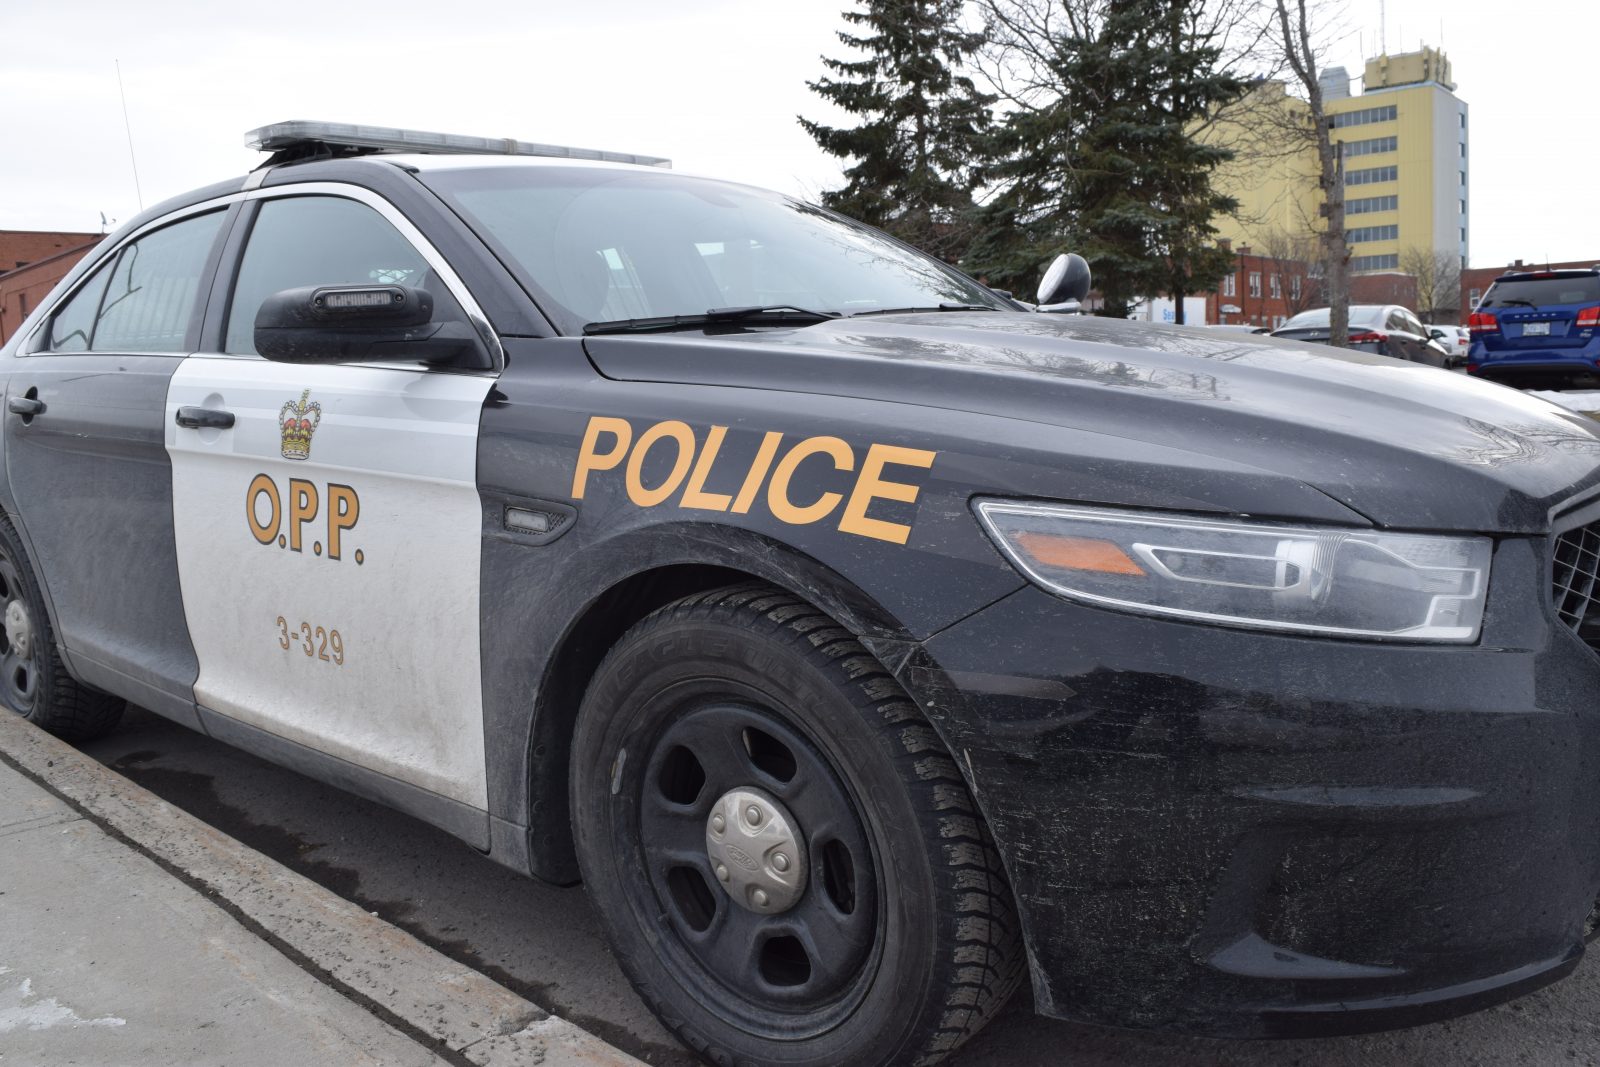 OPP apprehend dangerous driver who refused to leave vehicle